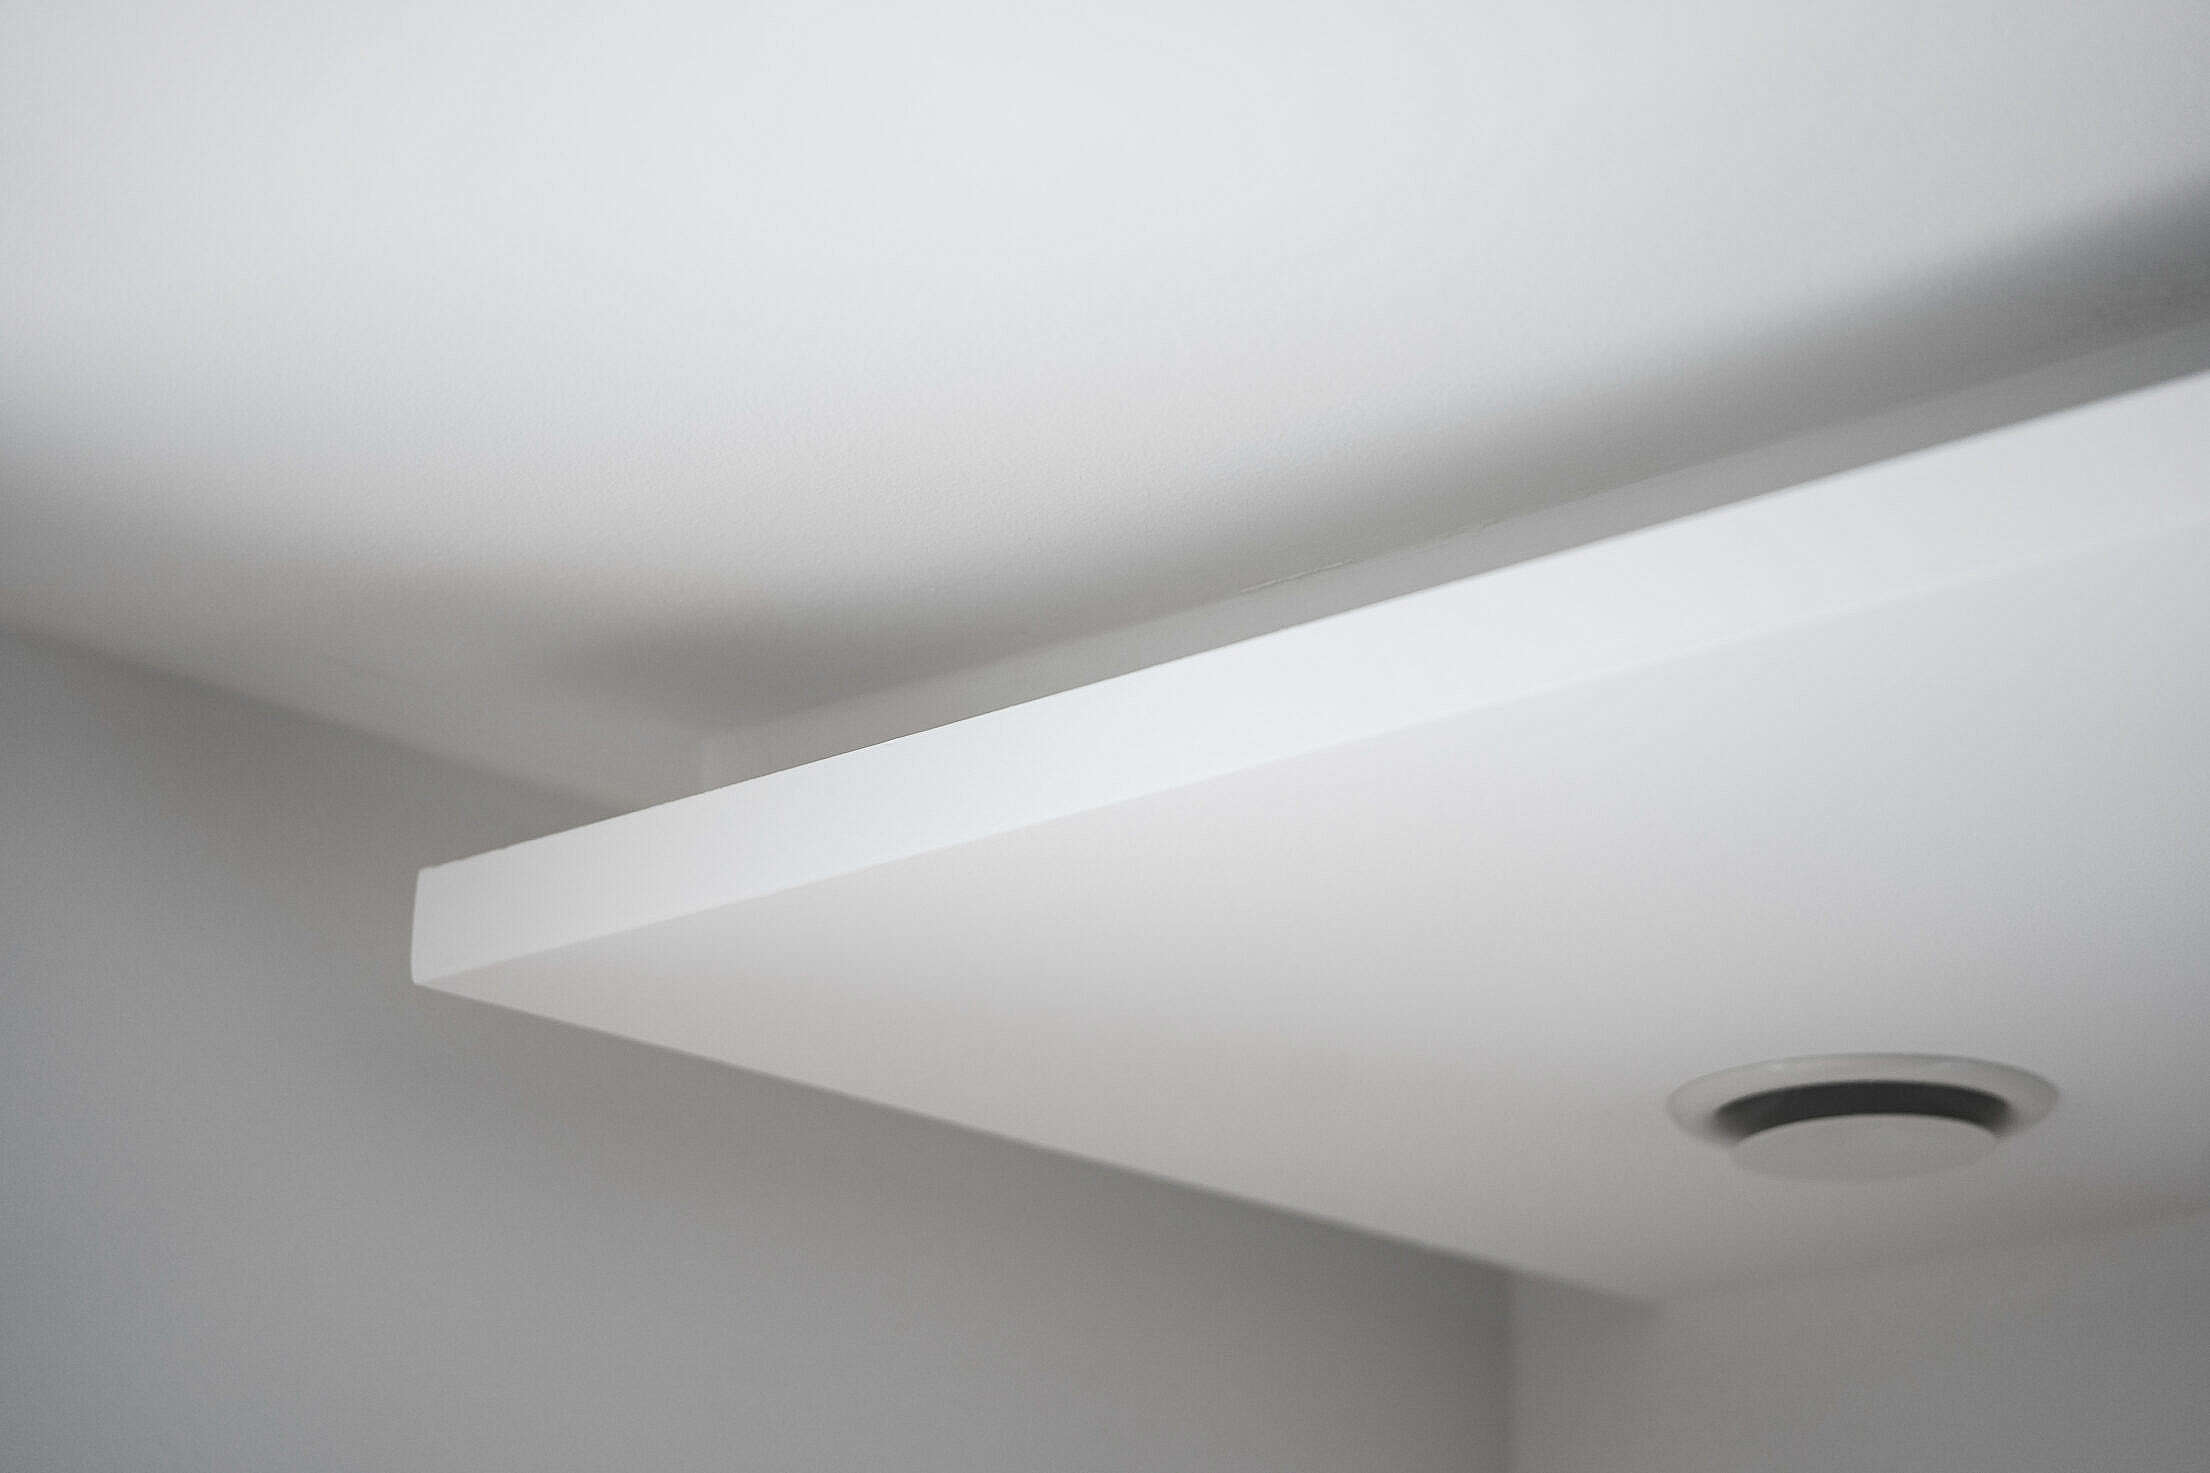 Drywall Ceiling with LED Lights Ramp and HVAC Fresh Air Vent Free Stock Photo